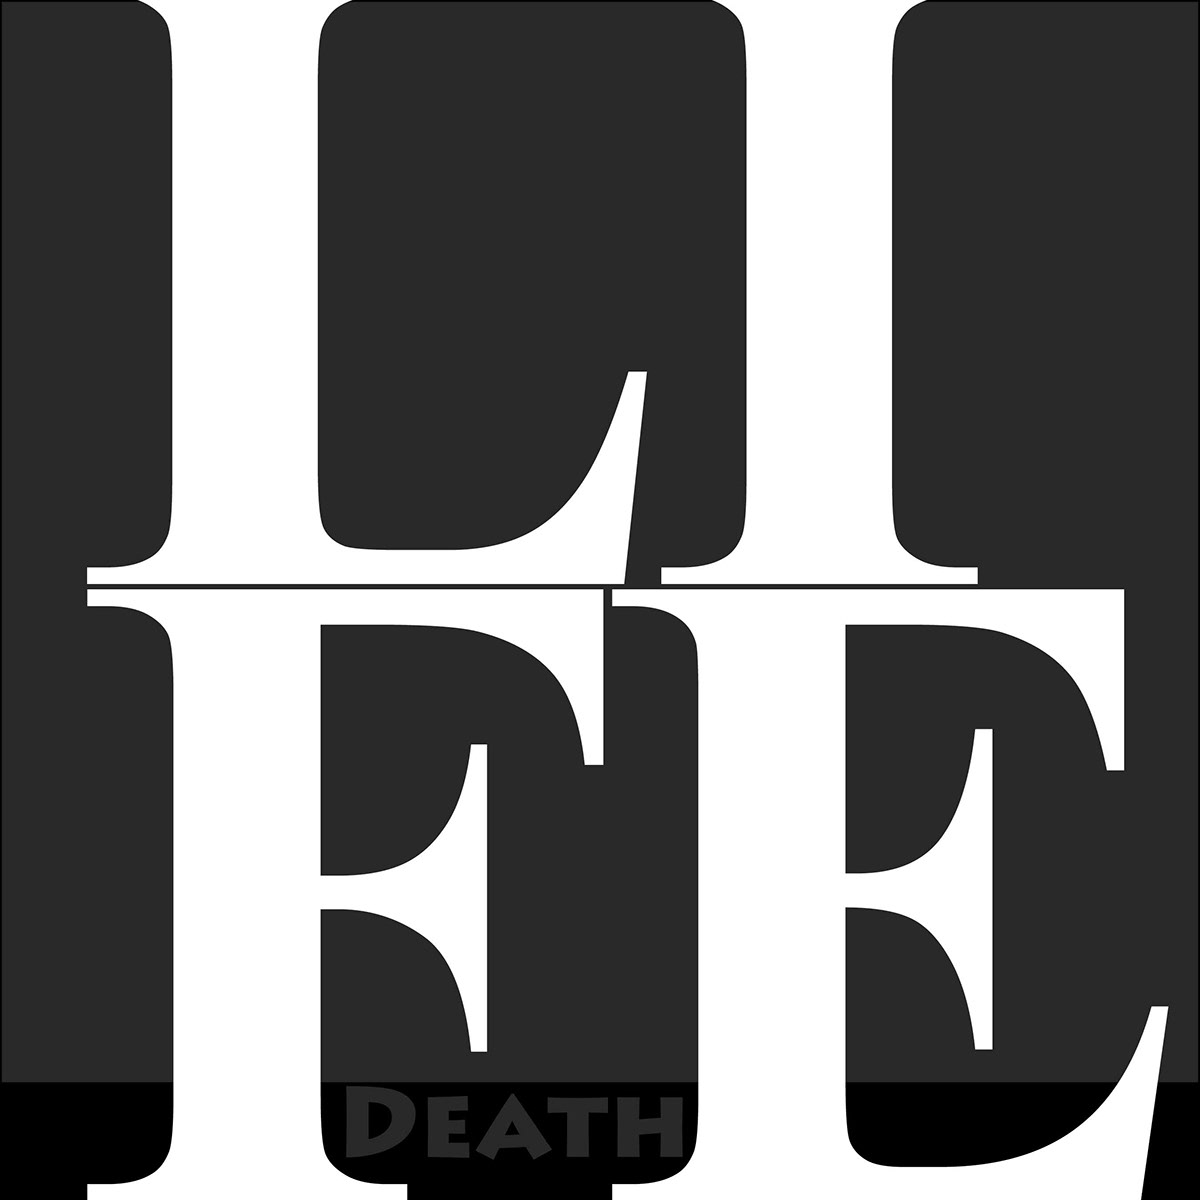 peace War fat skinny life death poster type